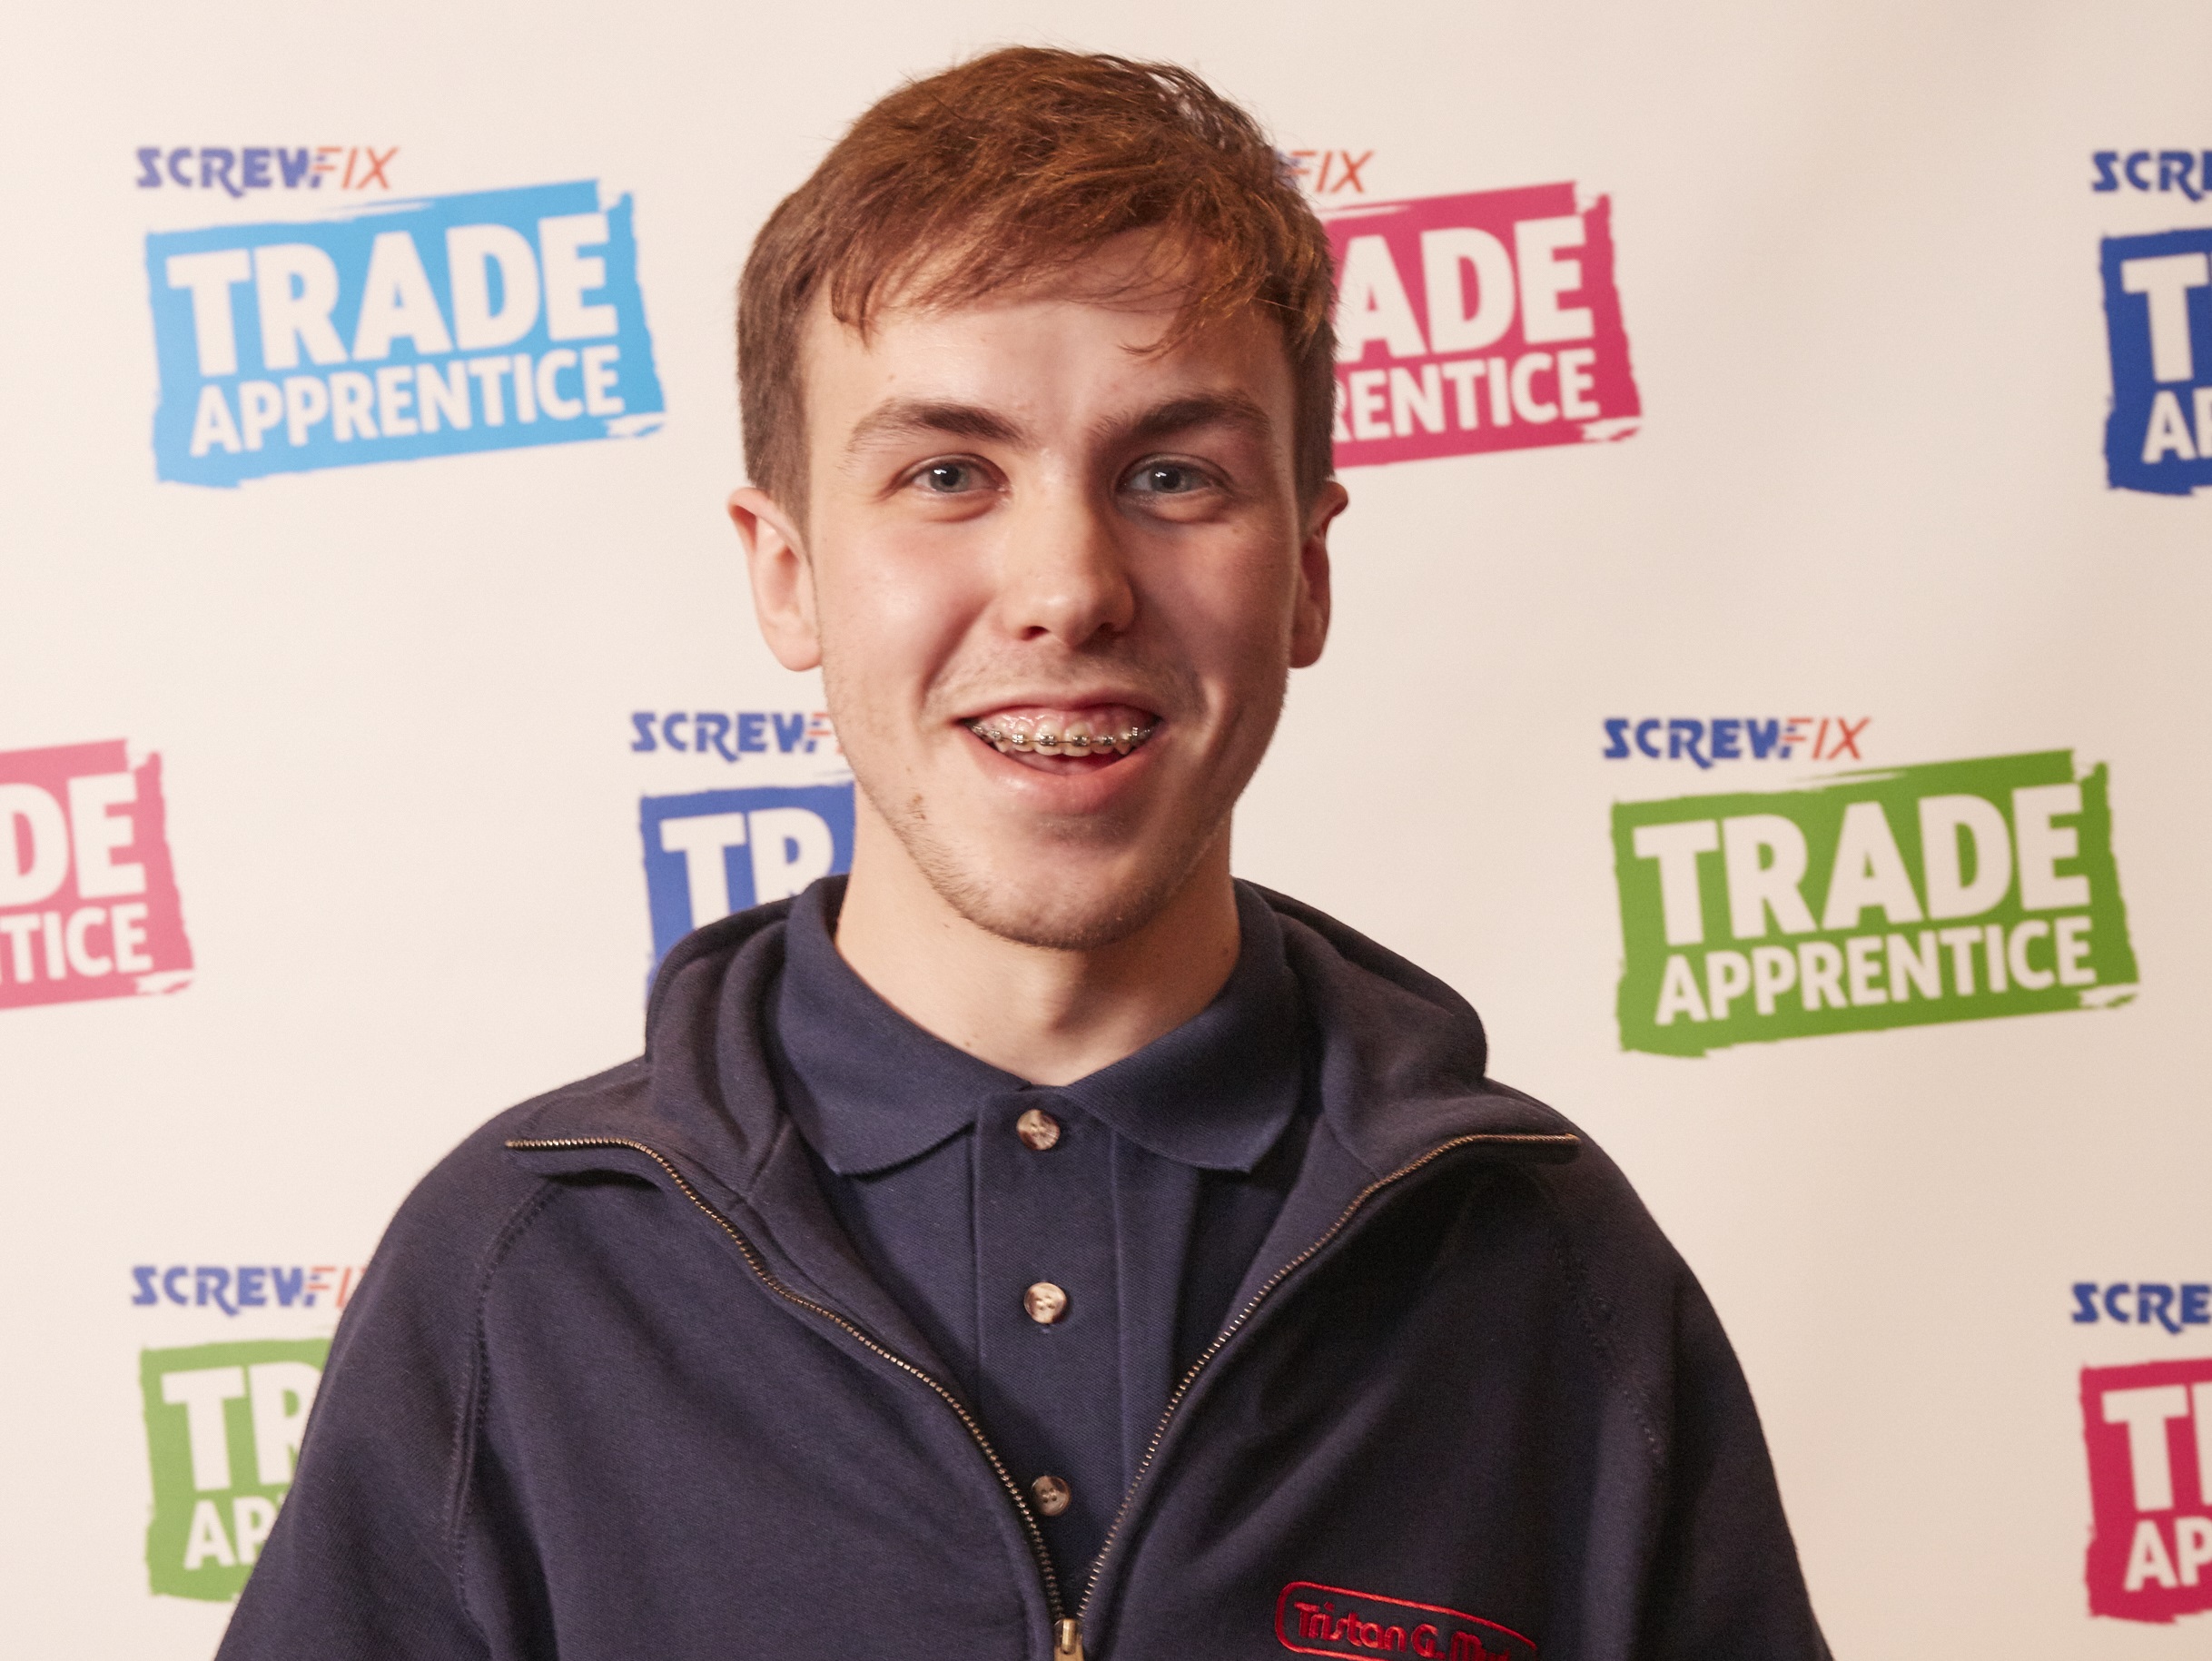 Do you have what it takes to be crowned Screwfix Trade Apprentice 2019?